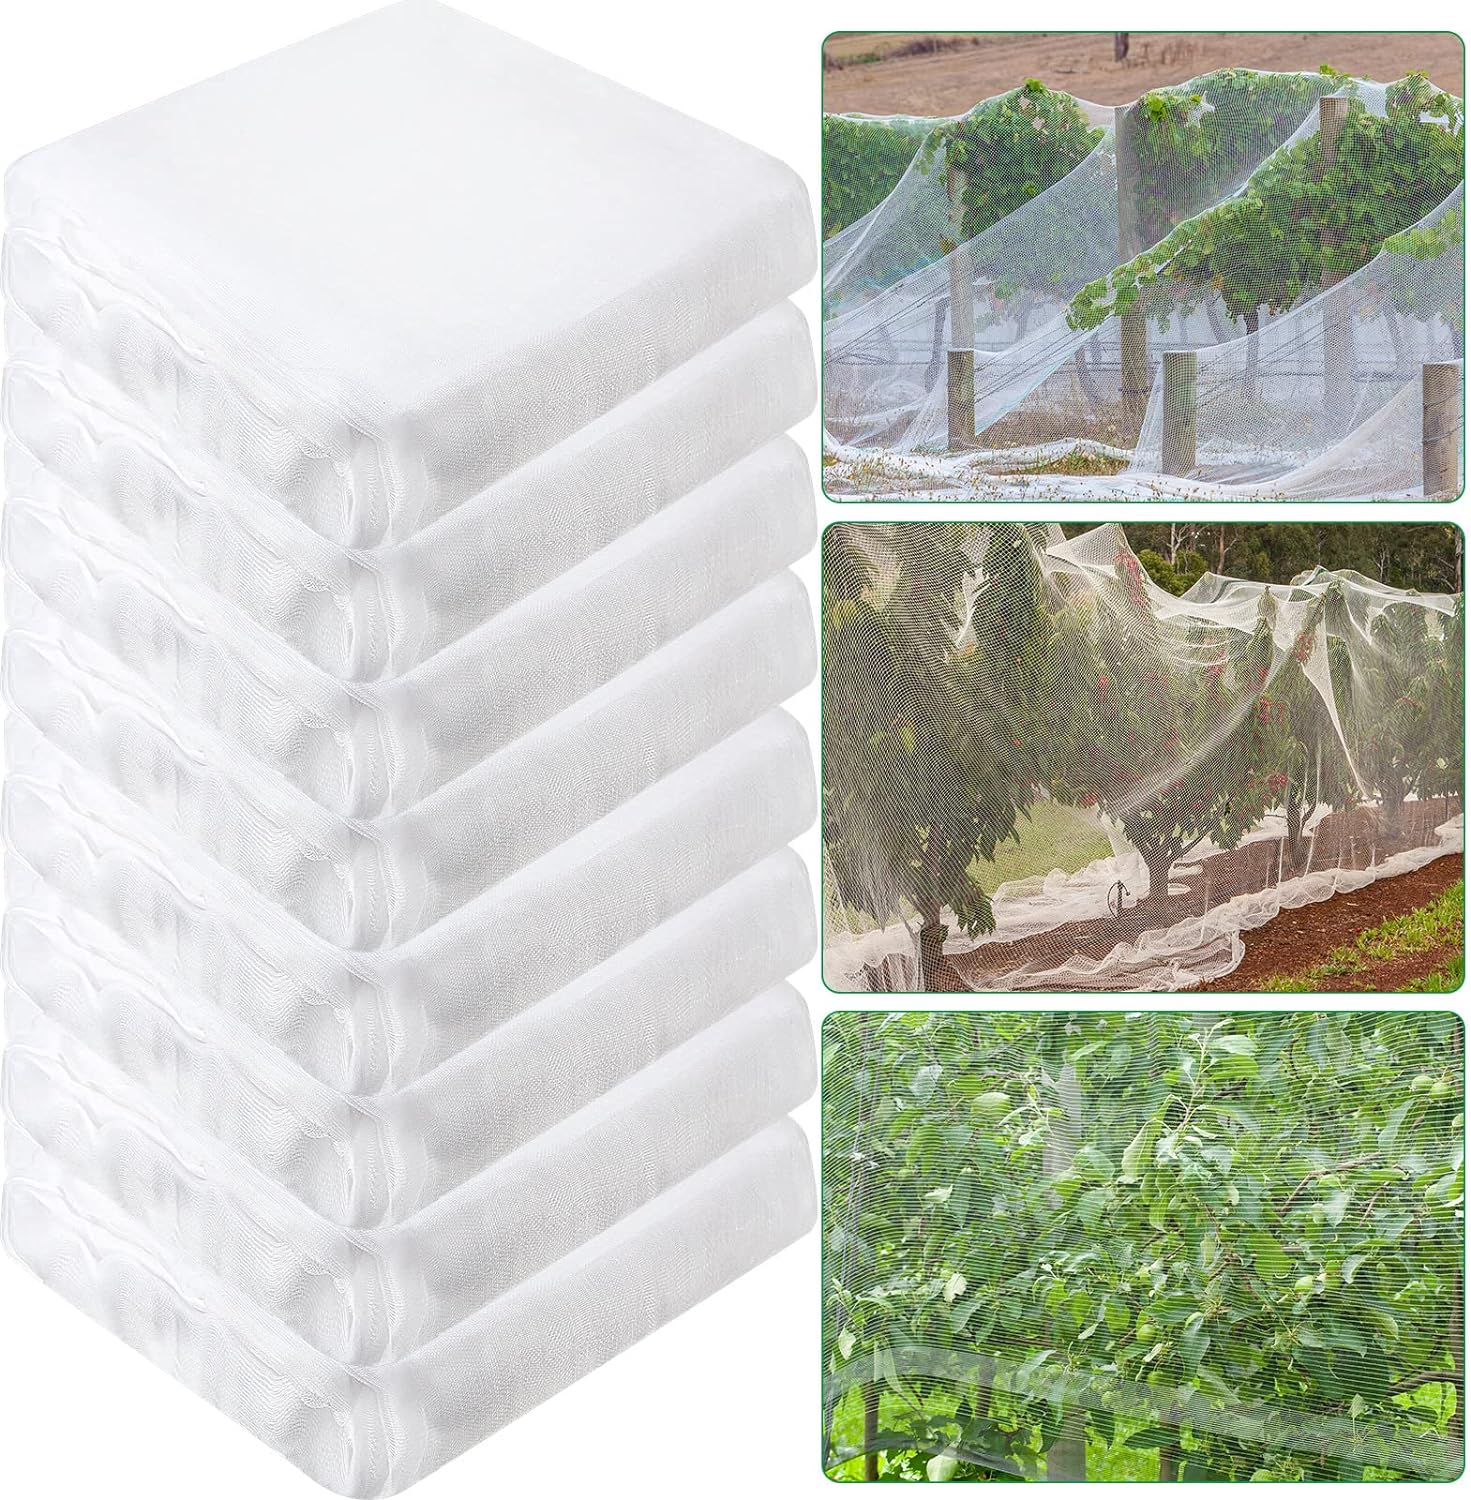 Lenwen 8 Pcs Garden Netting Mesh Ultra Fine Garden Plant Covers from Bird Screen Barrier Netting Greenhouse Row Covers for Vegetables Plants Fruits Flowers Crops Protection (10 x 20 FT)